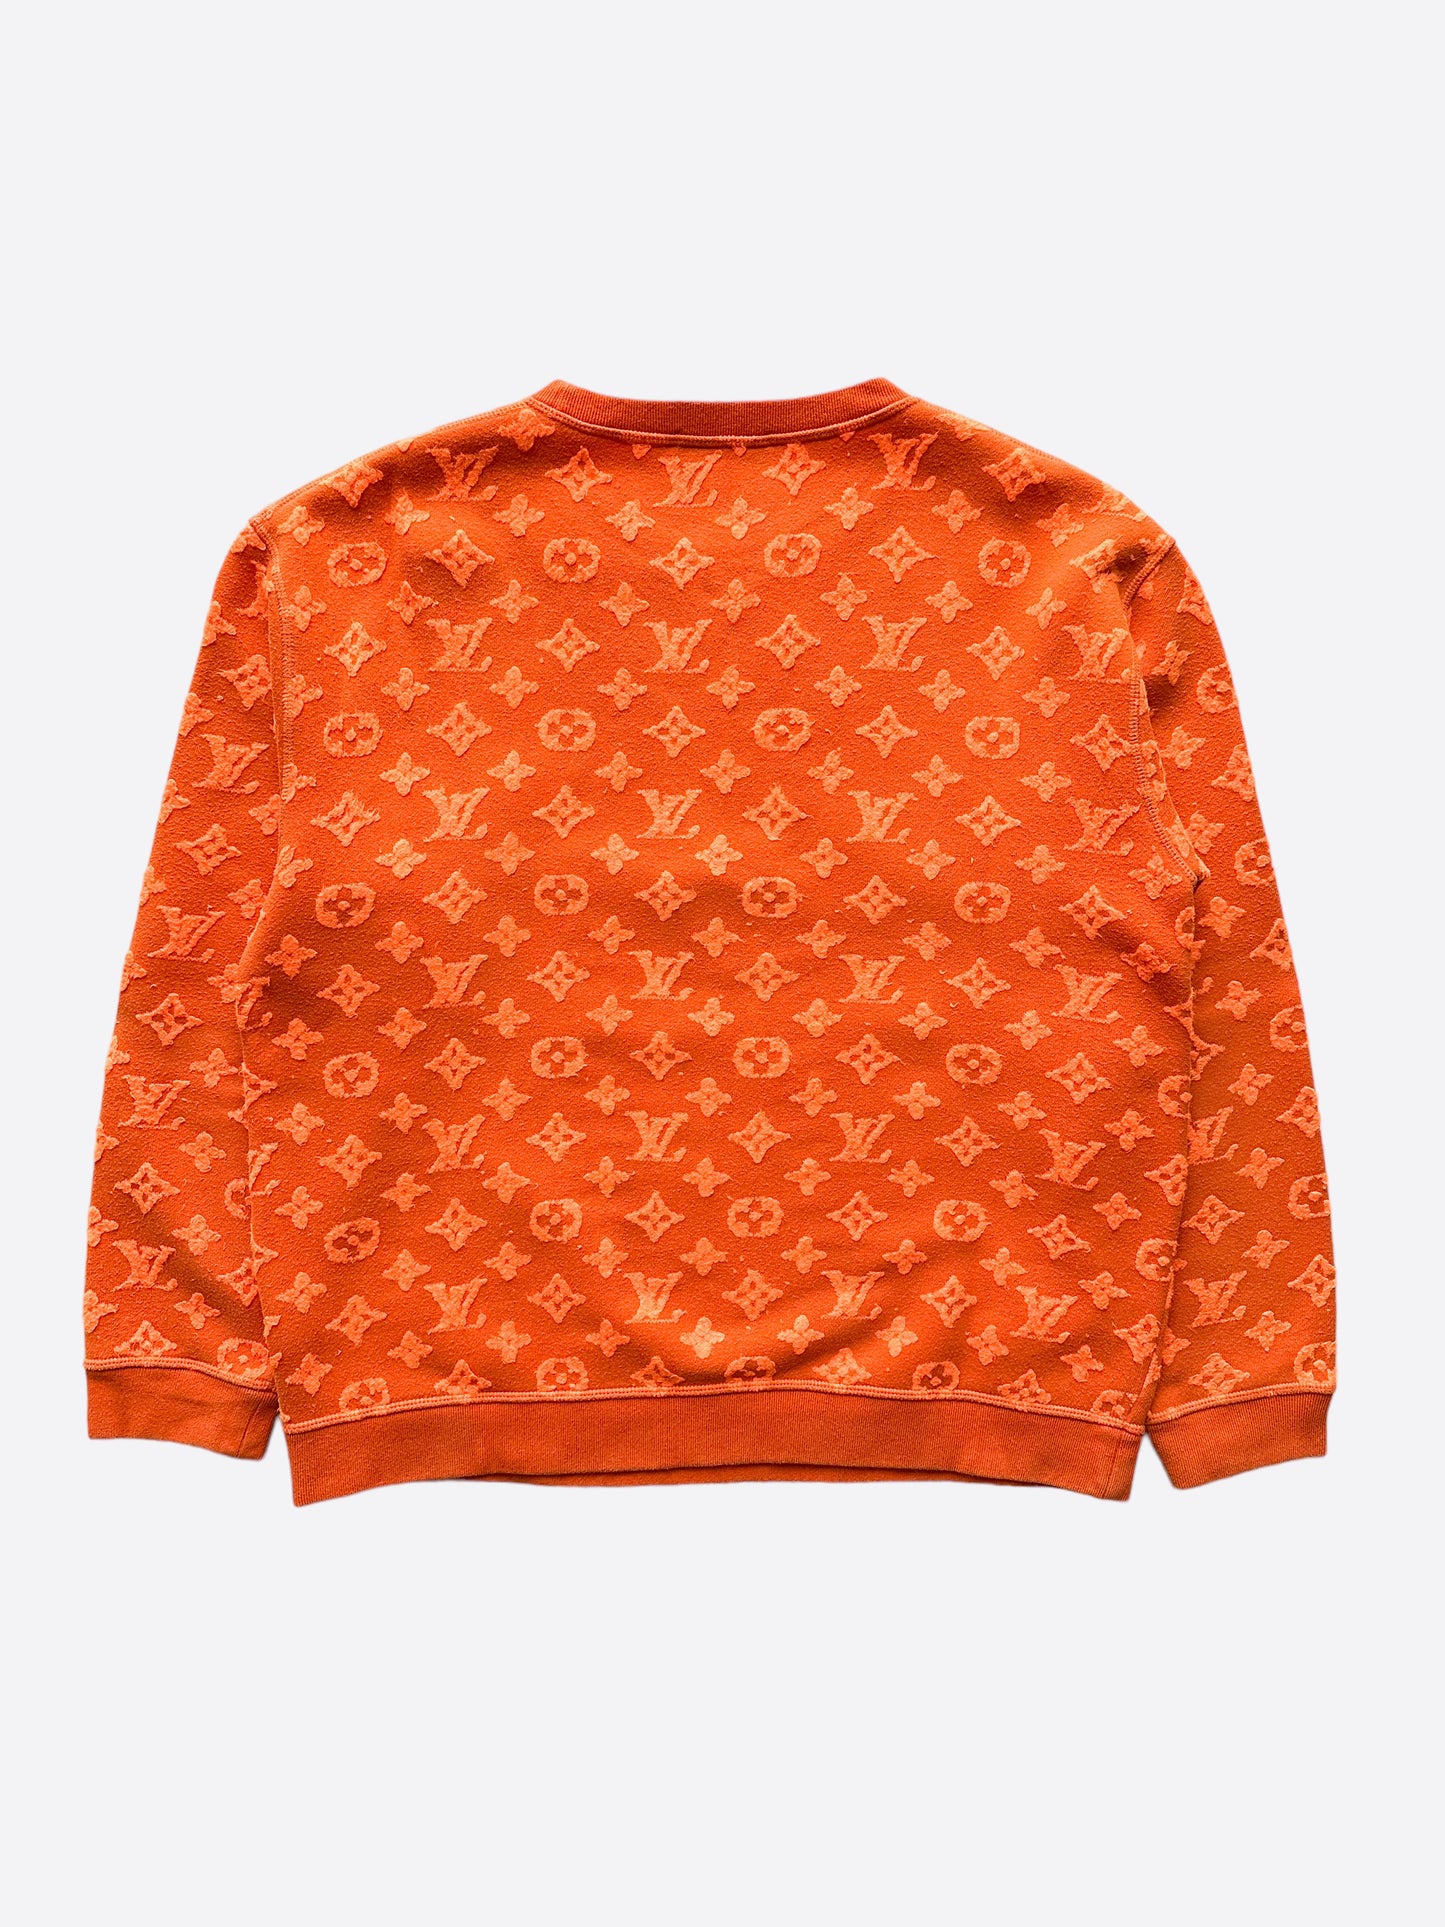 louis vuitton sweater red